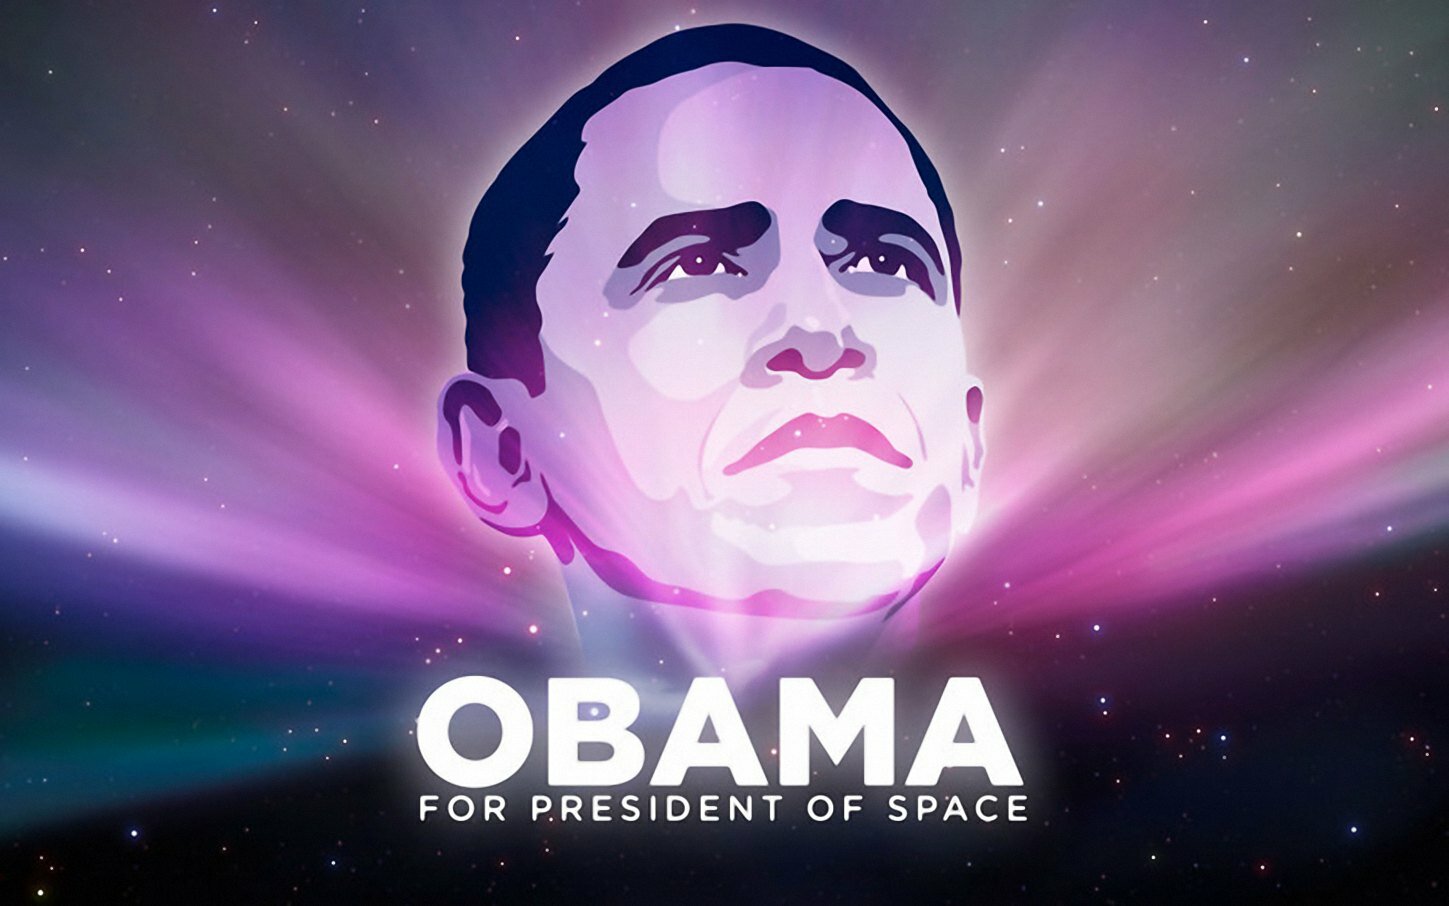 This was discovered at Scott Mcdaniel via Wallpaper For Obama.